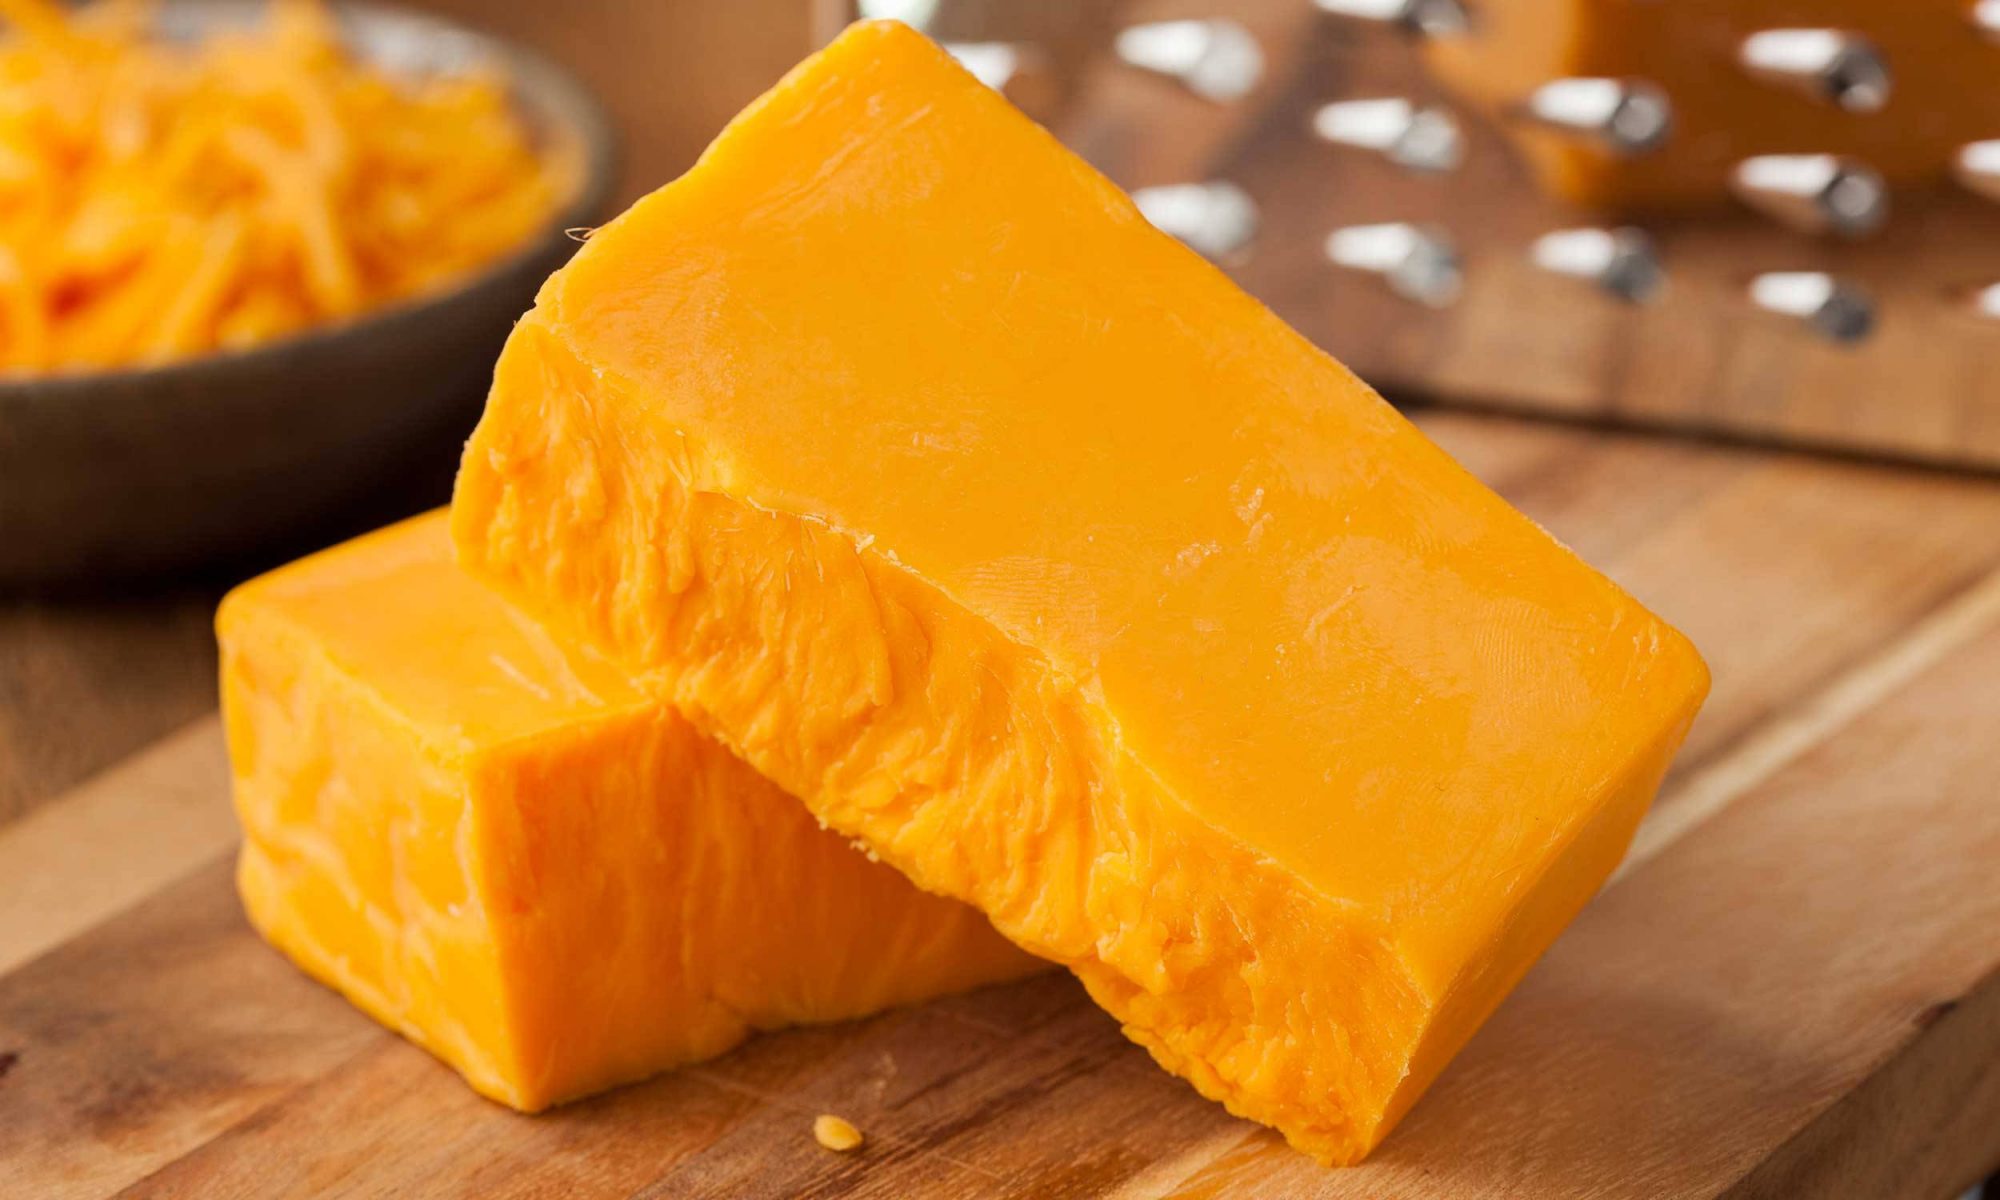 EC: How to Store Hard Cheeses So They Don't Get Moldy